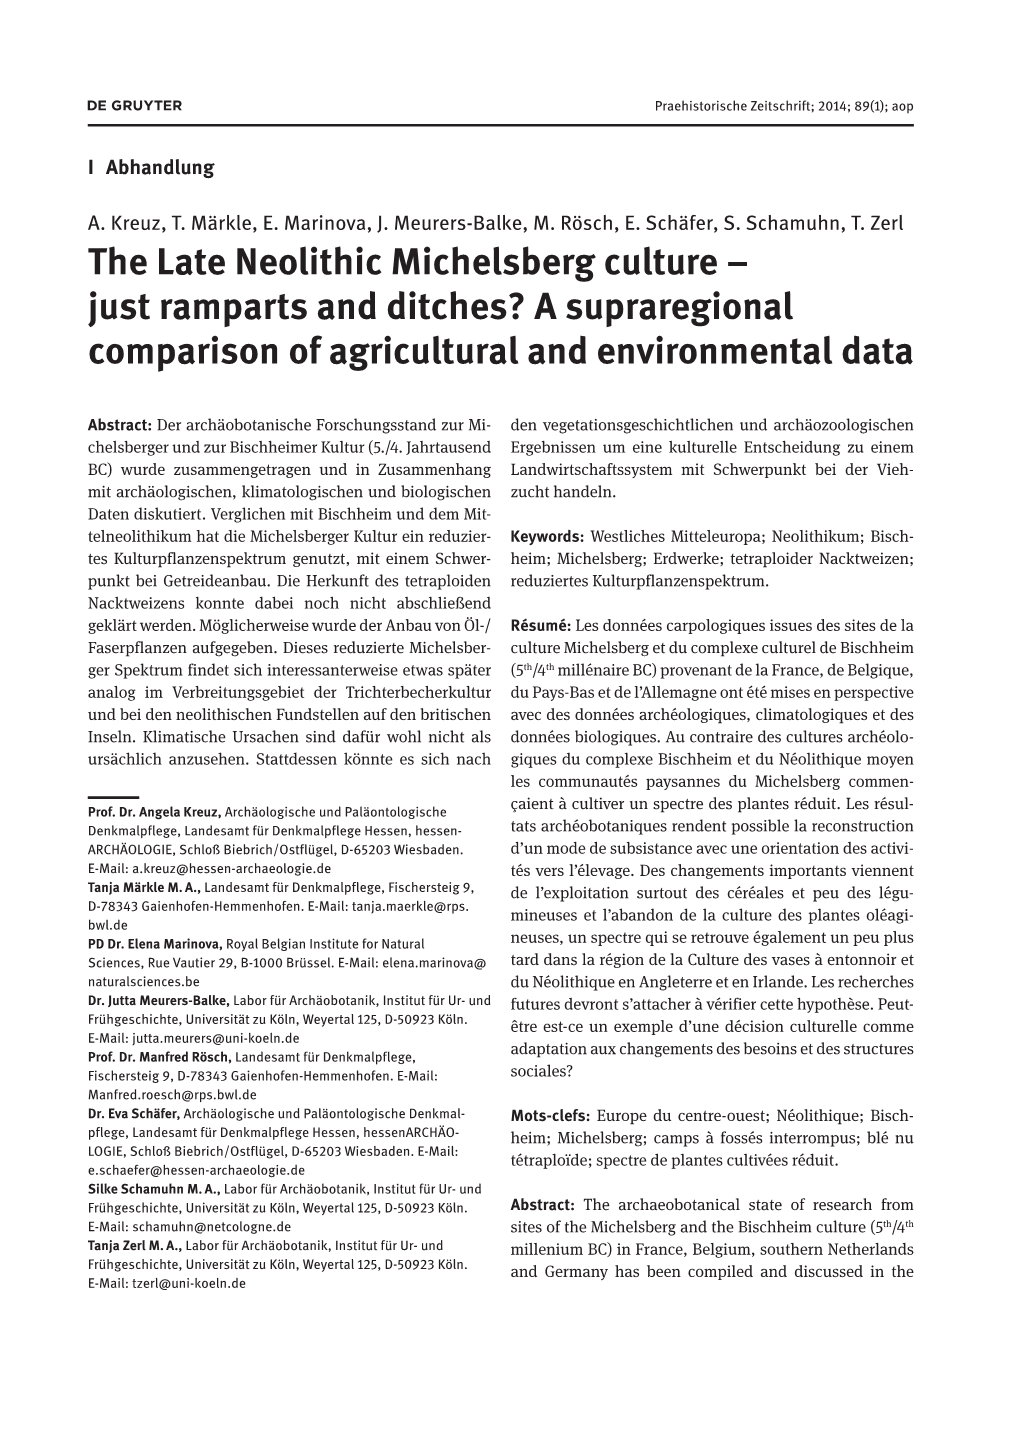 The Late Neolithic Michelsberg Culture – Just Ramparts and Ditches? a Supraregional Comparison of Agricultural and Environmental Data